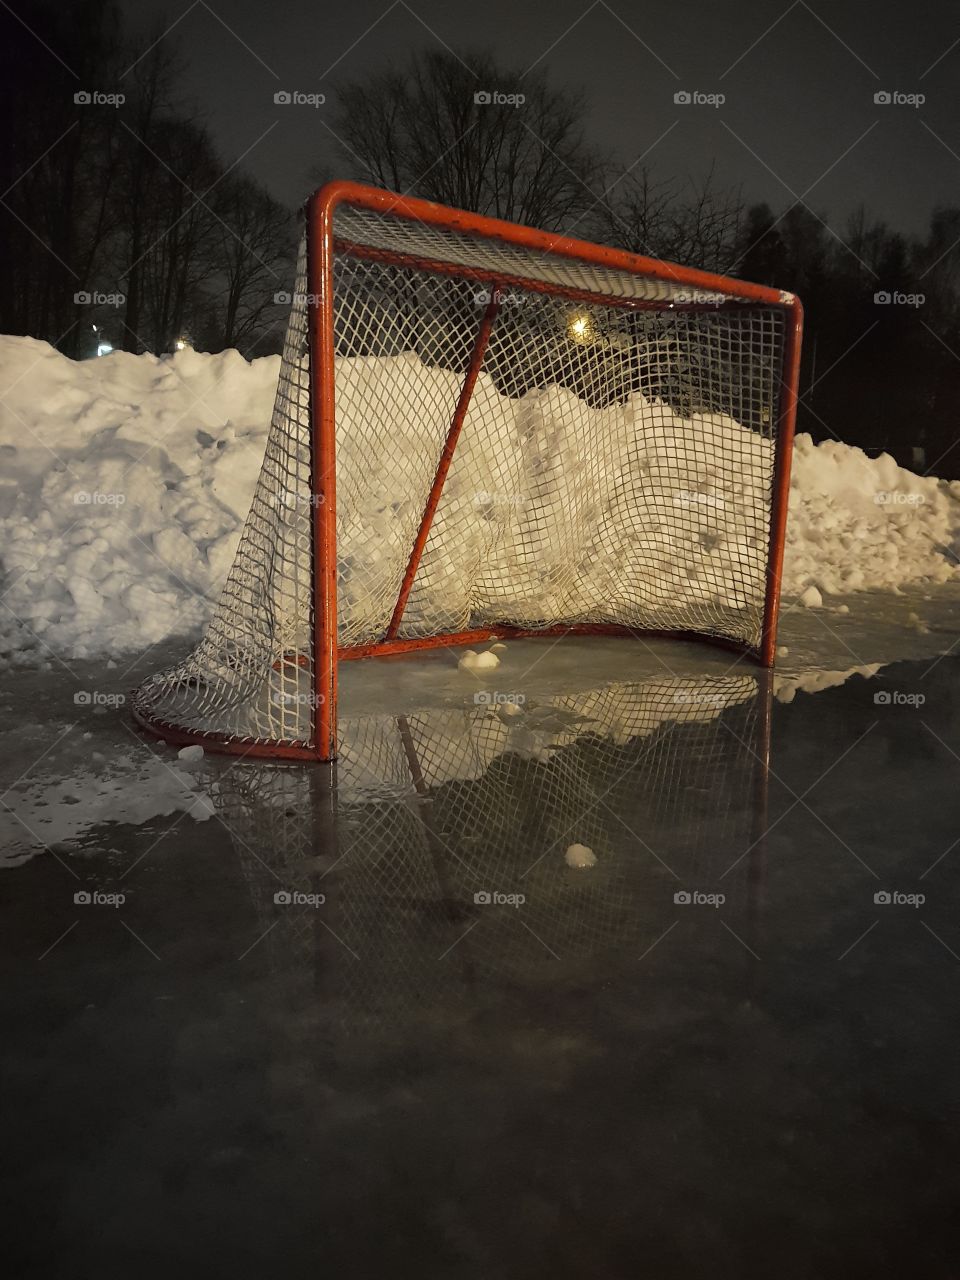 Ice hockey goal on a snowy bank with water on ice.